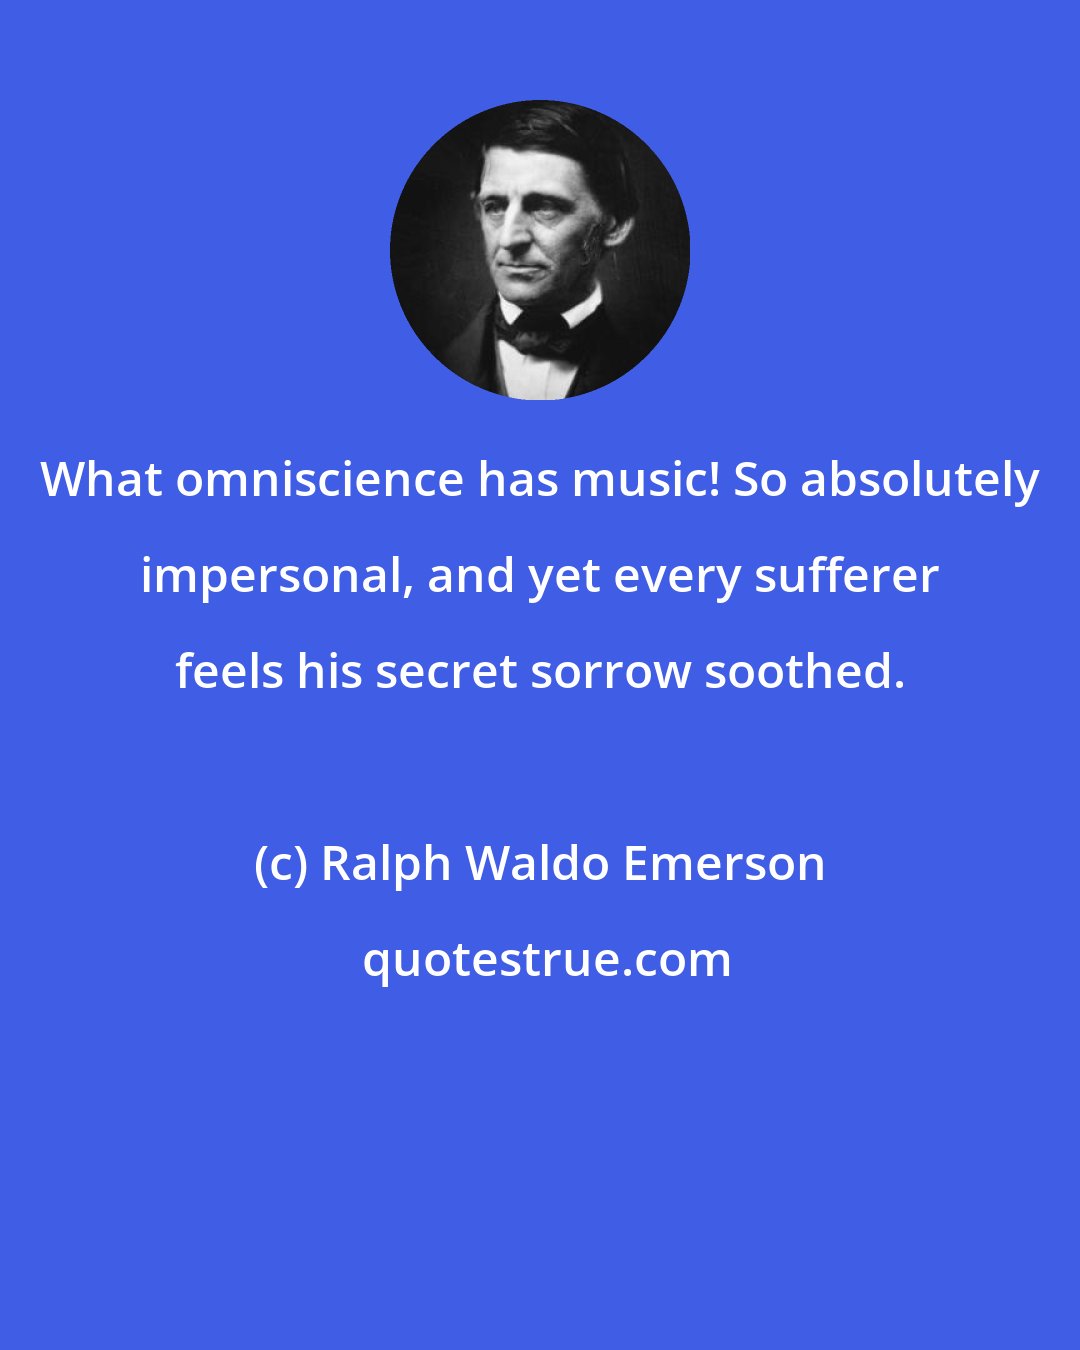 Ralph Waldo Emerson: What omniscience has music! So absolutely impersonal, and yet every sufferer feels his secret sorrow soothed.